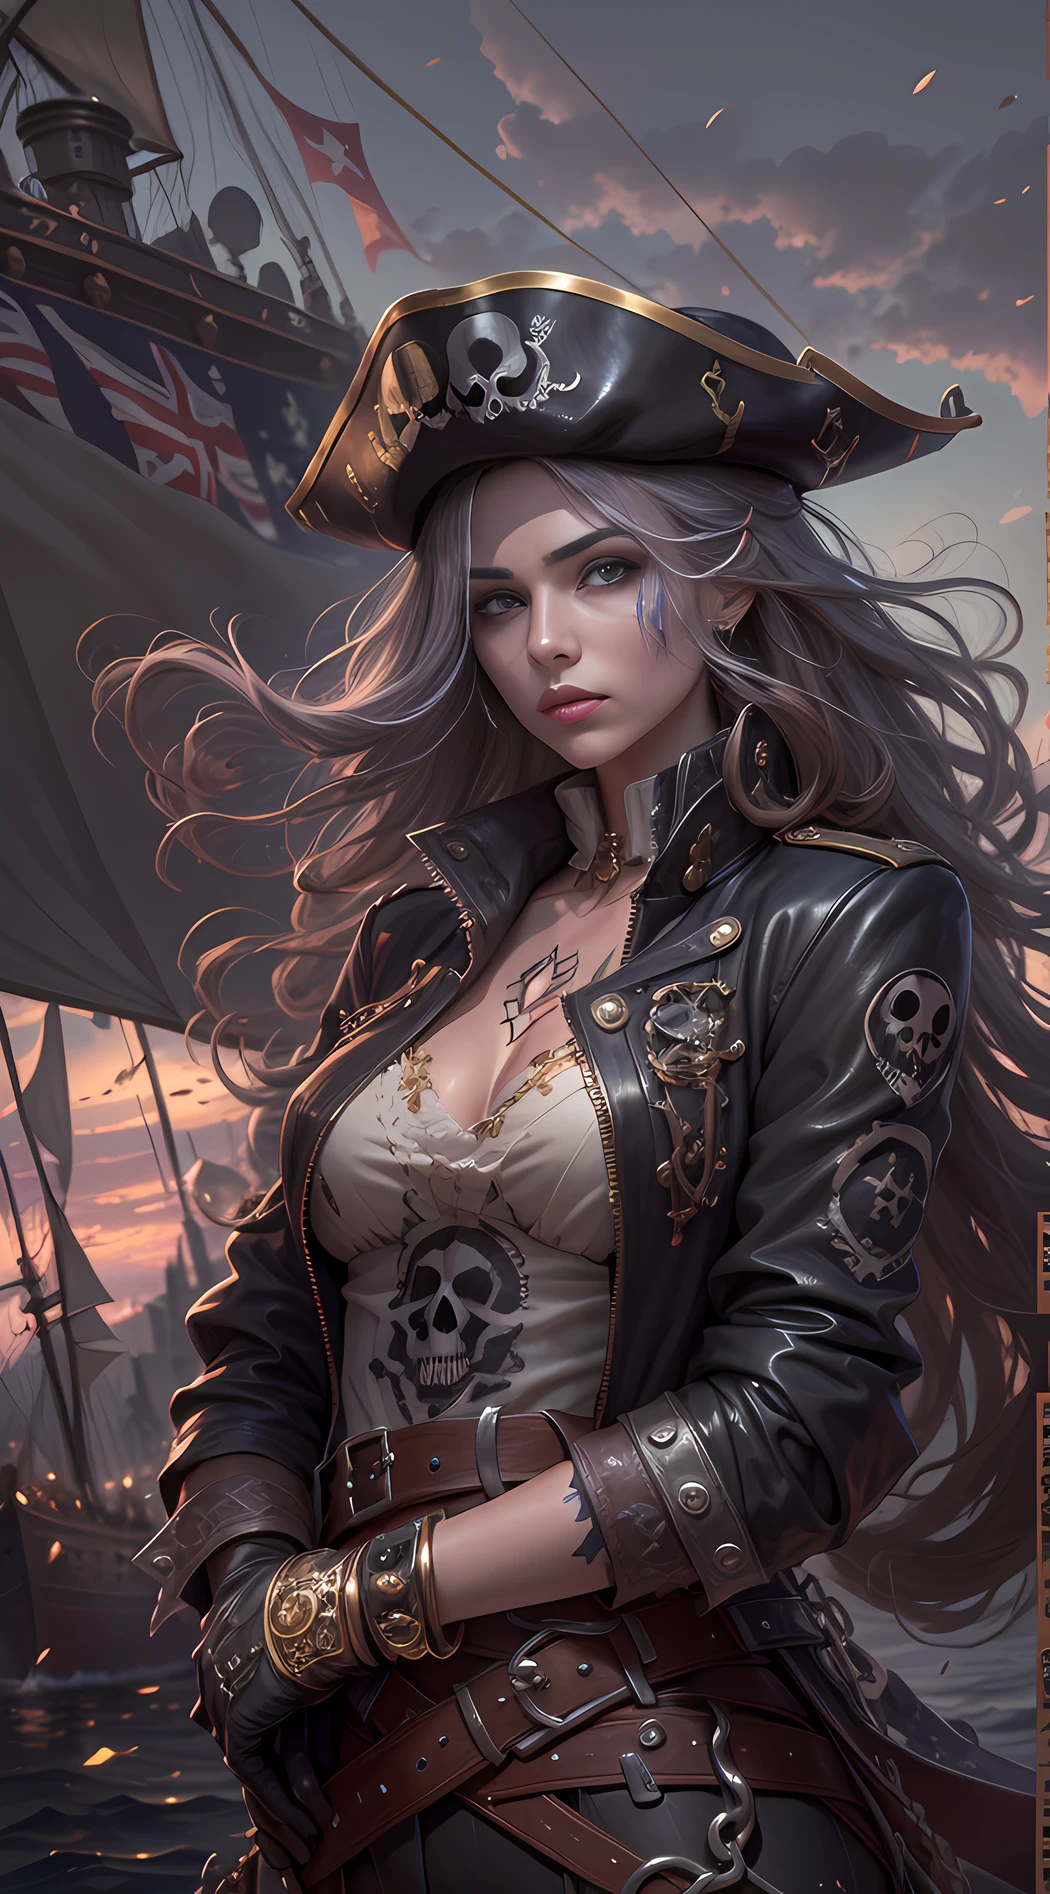 Full body, Top quality, intricate details , (fine skin, shiny skin, shiny hair, pale complexion), purple sky, golden time, sunset, sailing ship, pirate ship, ((skull mark on flag)), ambitious, seductive woman, gray hair, long hair, hair fluttering in the wind, scars on the cheeks, detailed tattoos, leather clothes, sleeveless clothes, leather coats, leather gloves, pure gold bangles, leather trousers, black trousers, pirate hat , hat with skull mark, (leather belt), look far away